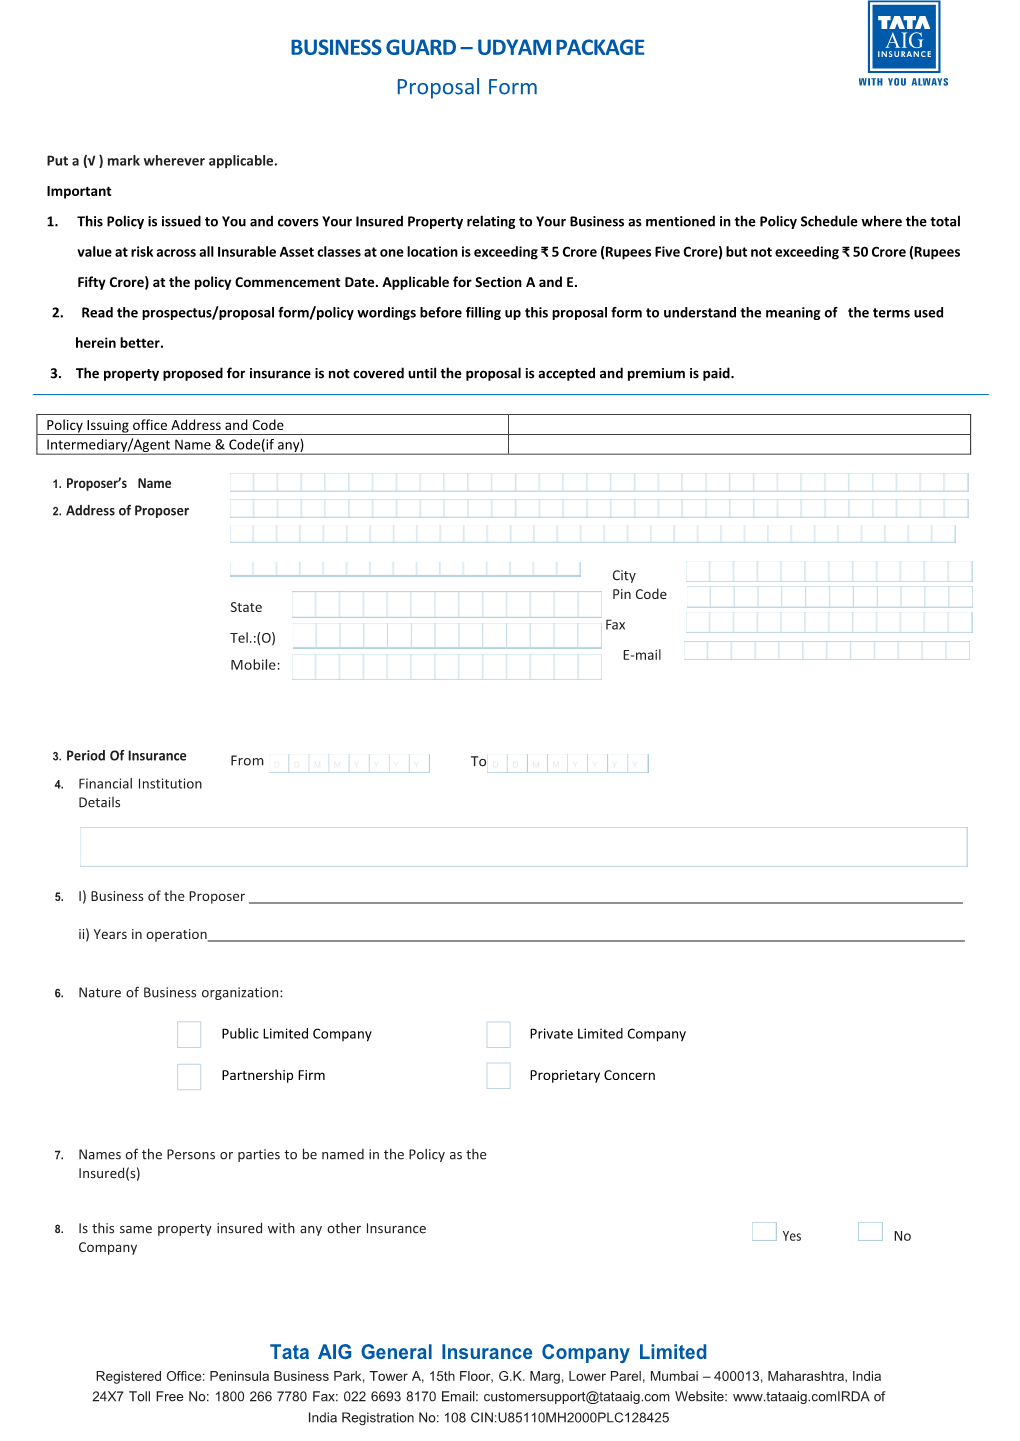 BUSINESS GUARD – UDYAM PACKAGE Proposal Form